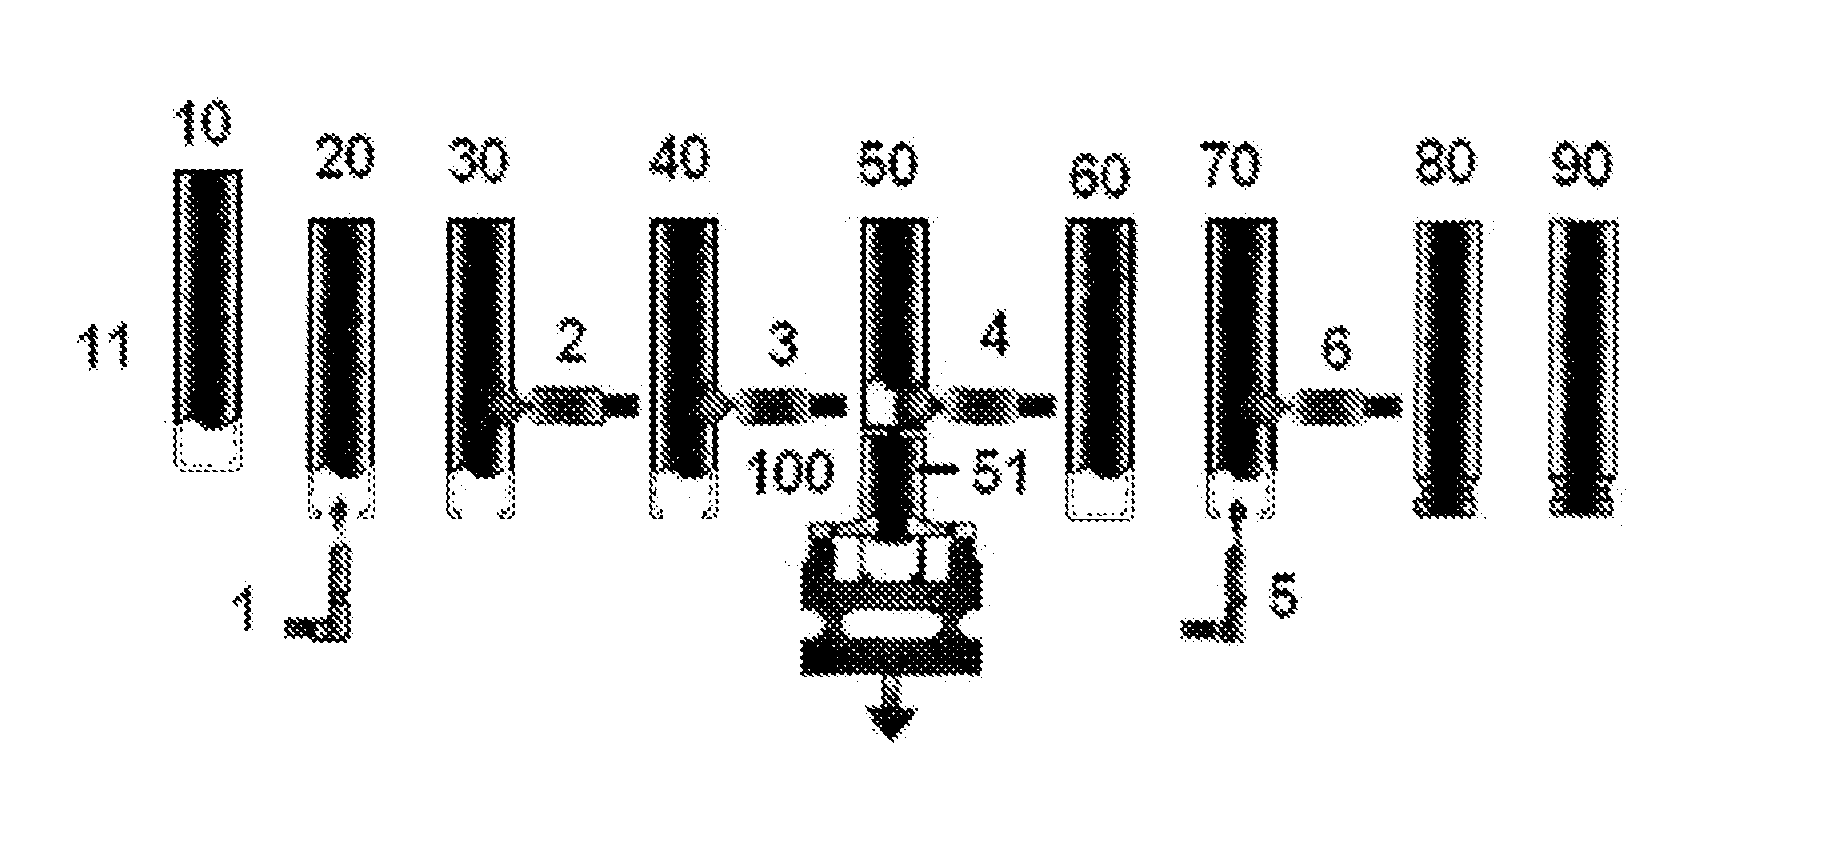 Method for manufacturing glass containers for pharmaceutical use